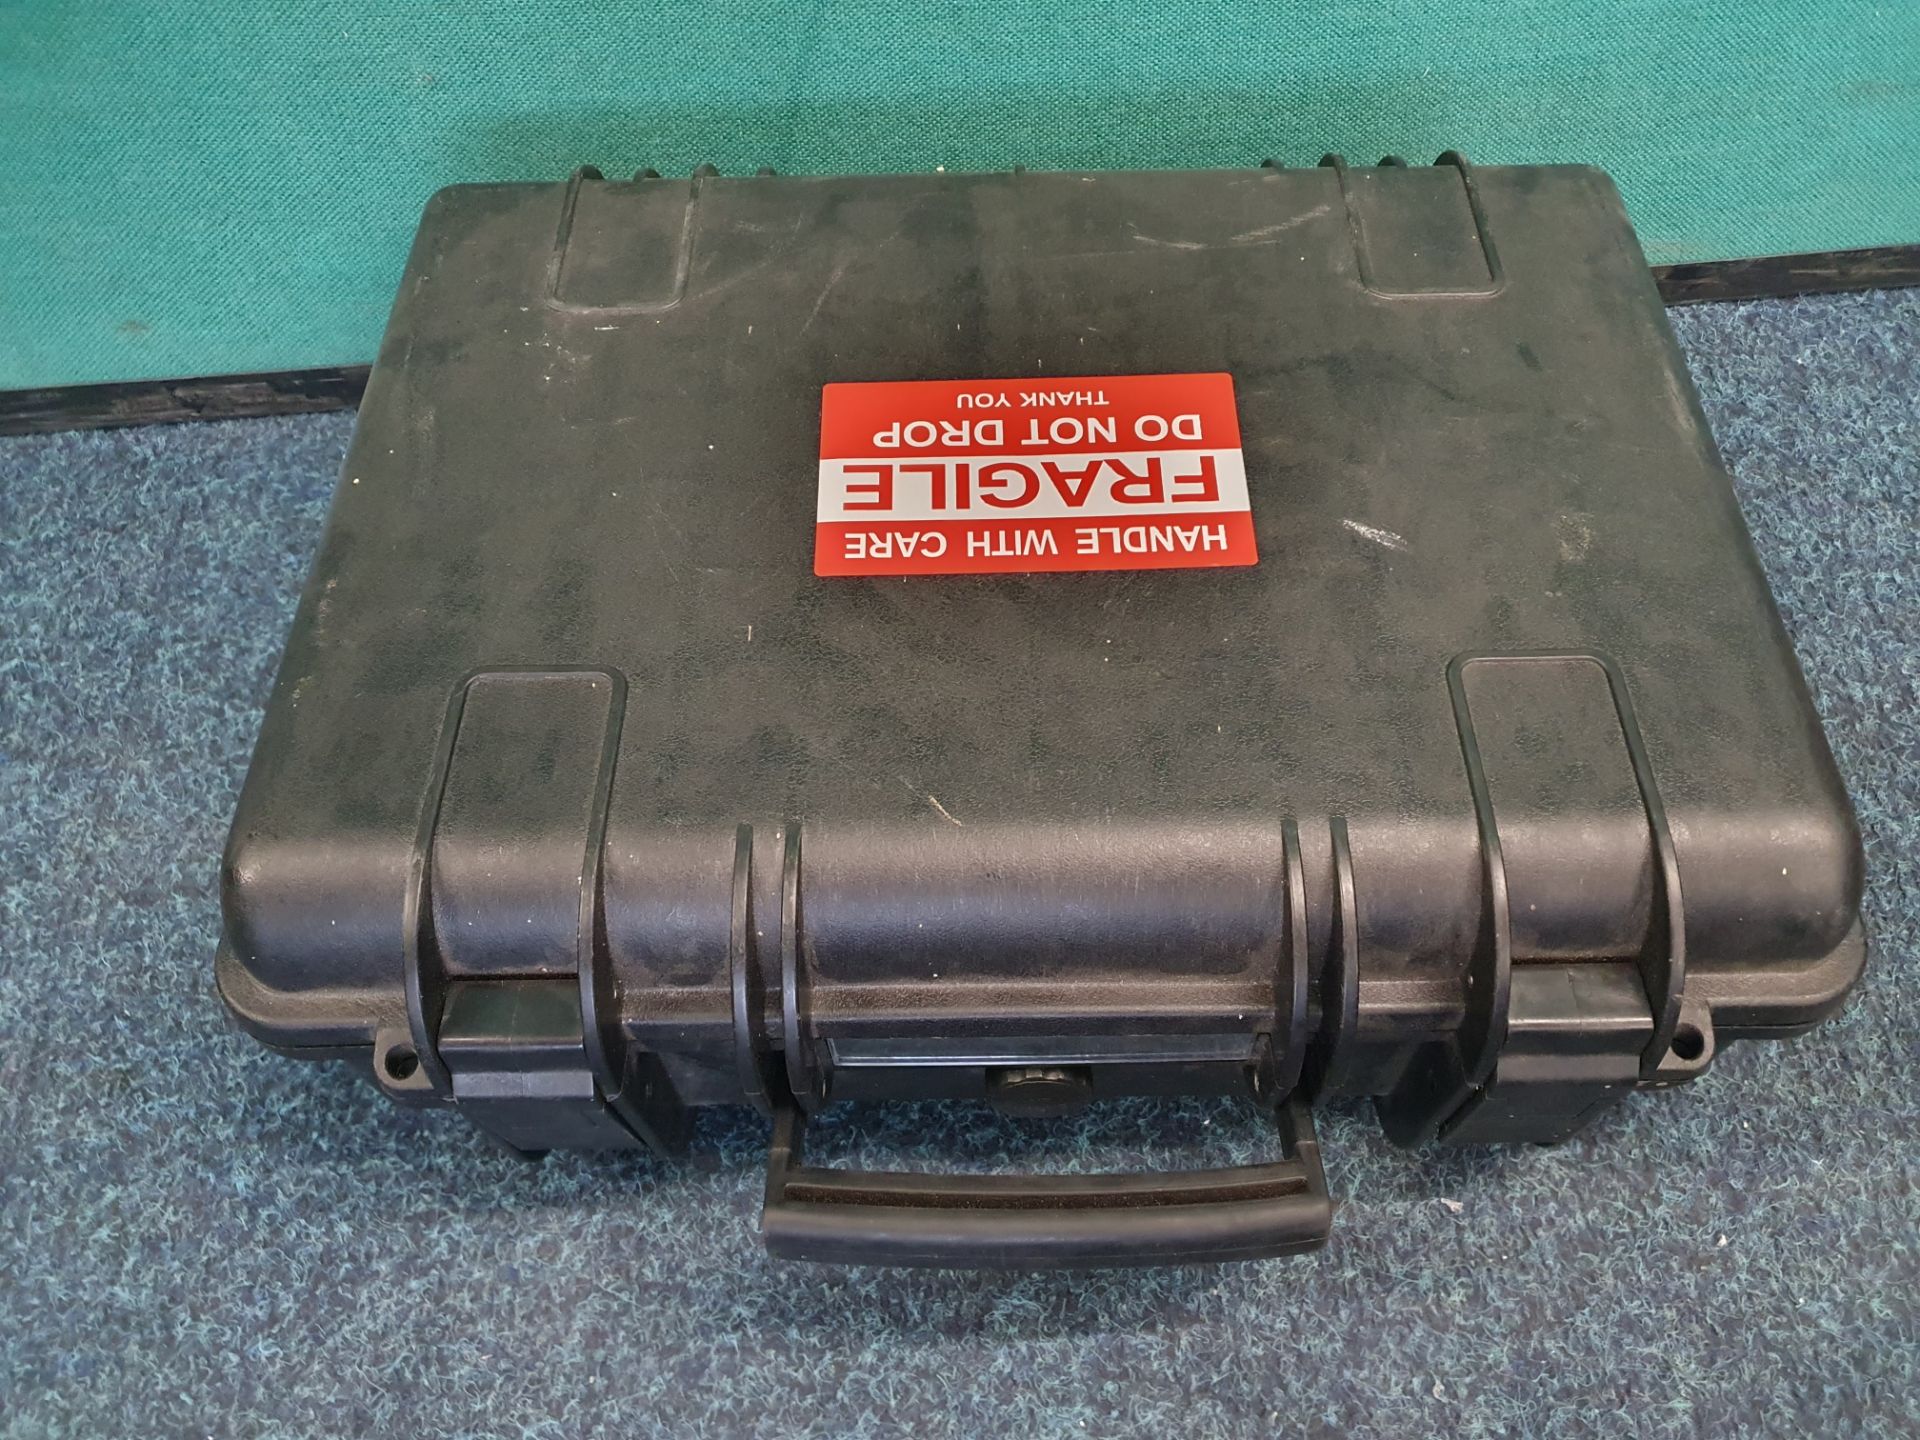 3 x Secure Carry Cases - Image 7 of 7